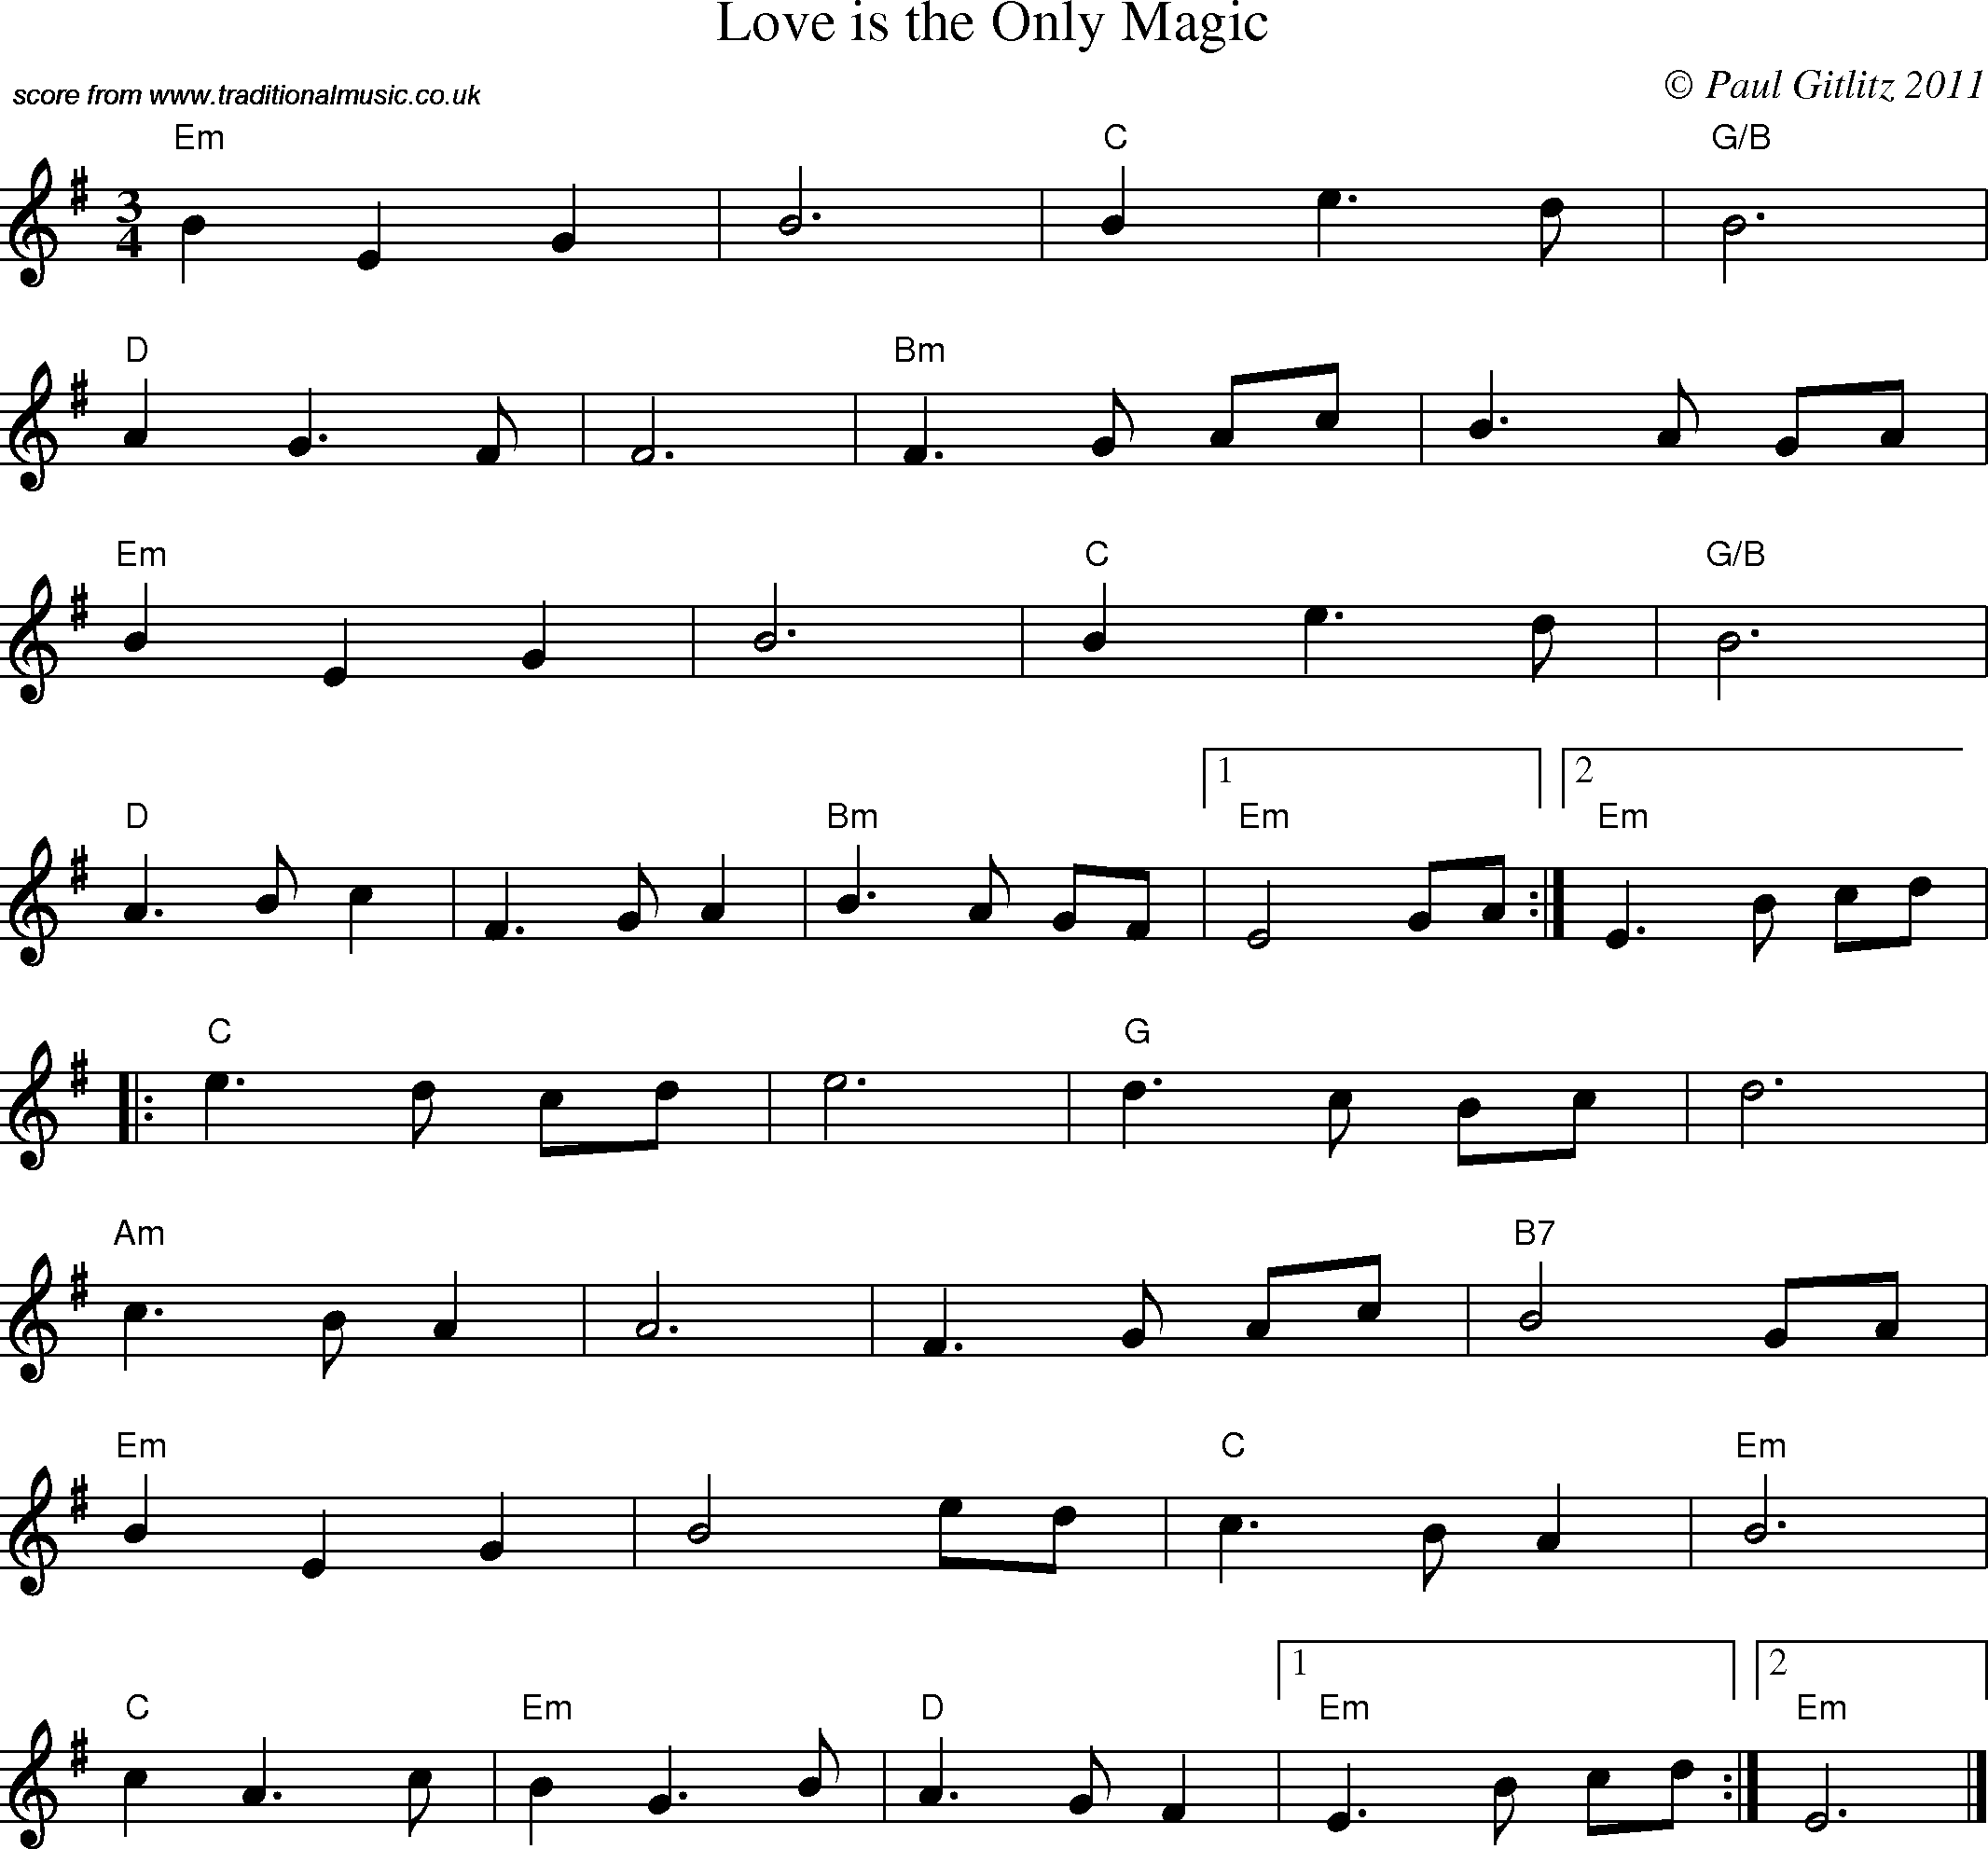 Sheet Music Score for Waltz - Love is the Only Magic